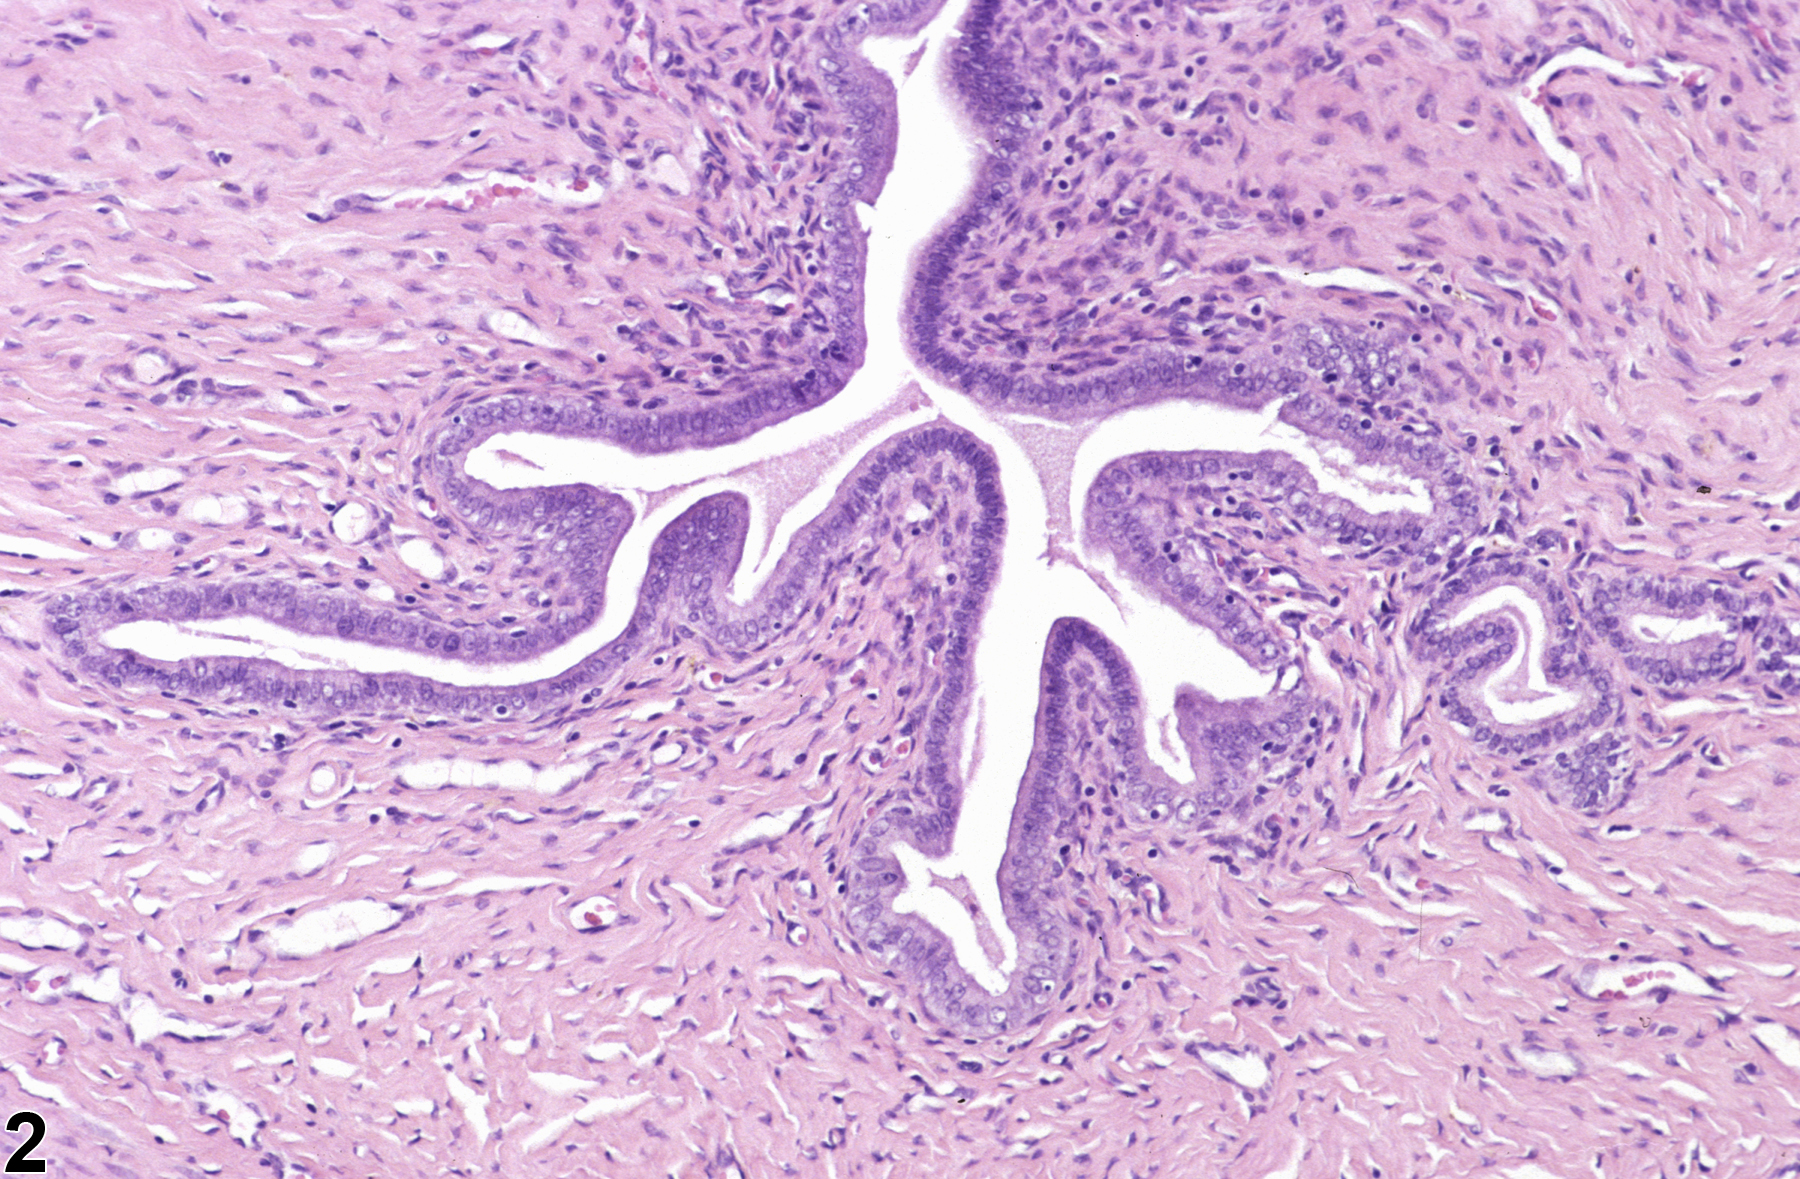 Image of hyperplasia, stromal in the uterus from a female F344/N rat in a chronic study